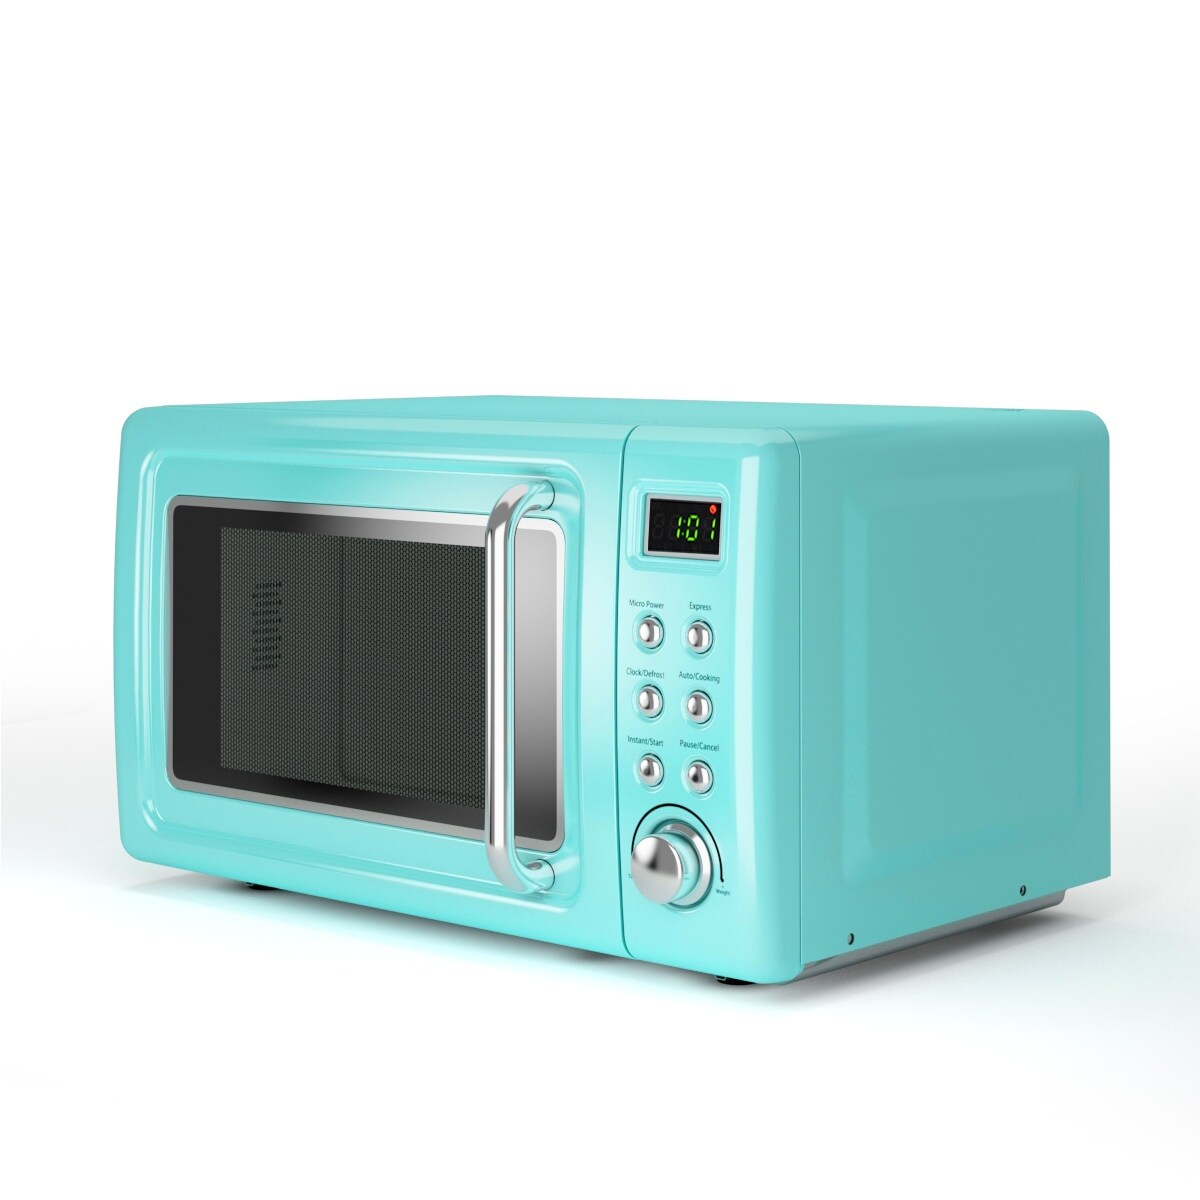 https://ak1.ostkcdn.com/images/products/is/images/direct/6a1a14dfc8cd75bed68077d8bbc056ccbf2646b3/Costway-0.7Cu.ft-Retro-Countertop-Microwave-Oven-700W-LED-Display-Glass-Turntable-RedGreenblack-rose-gold.jpg